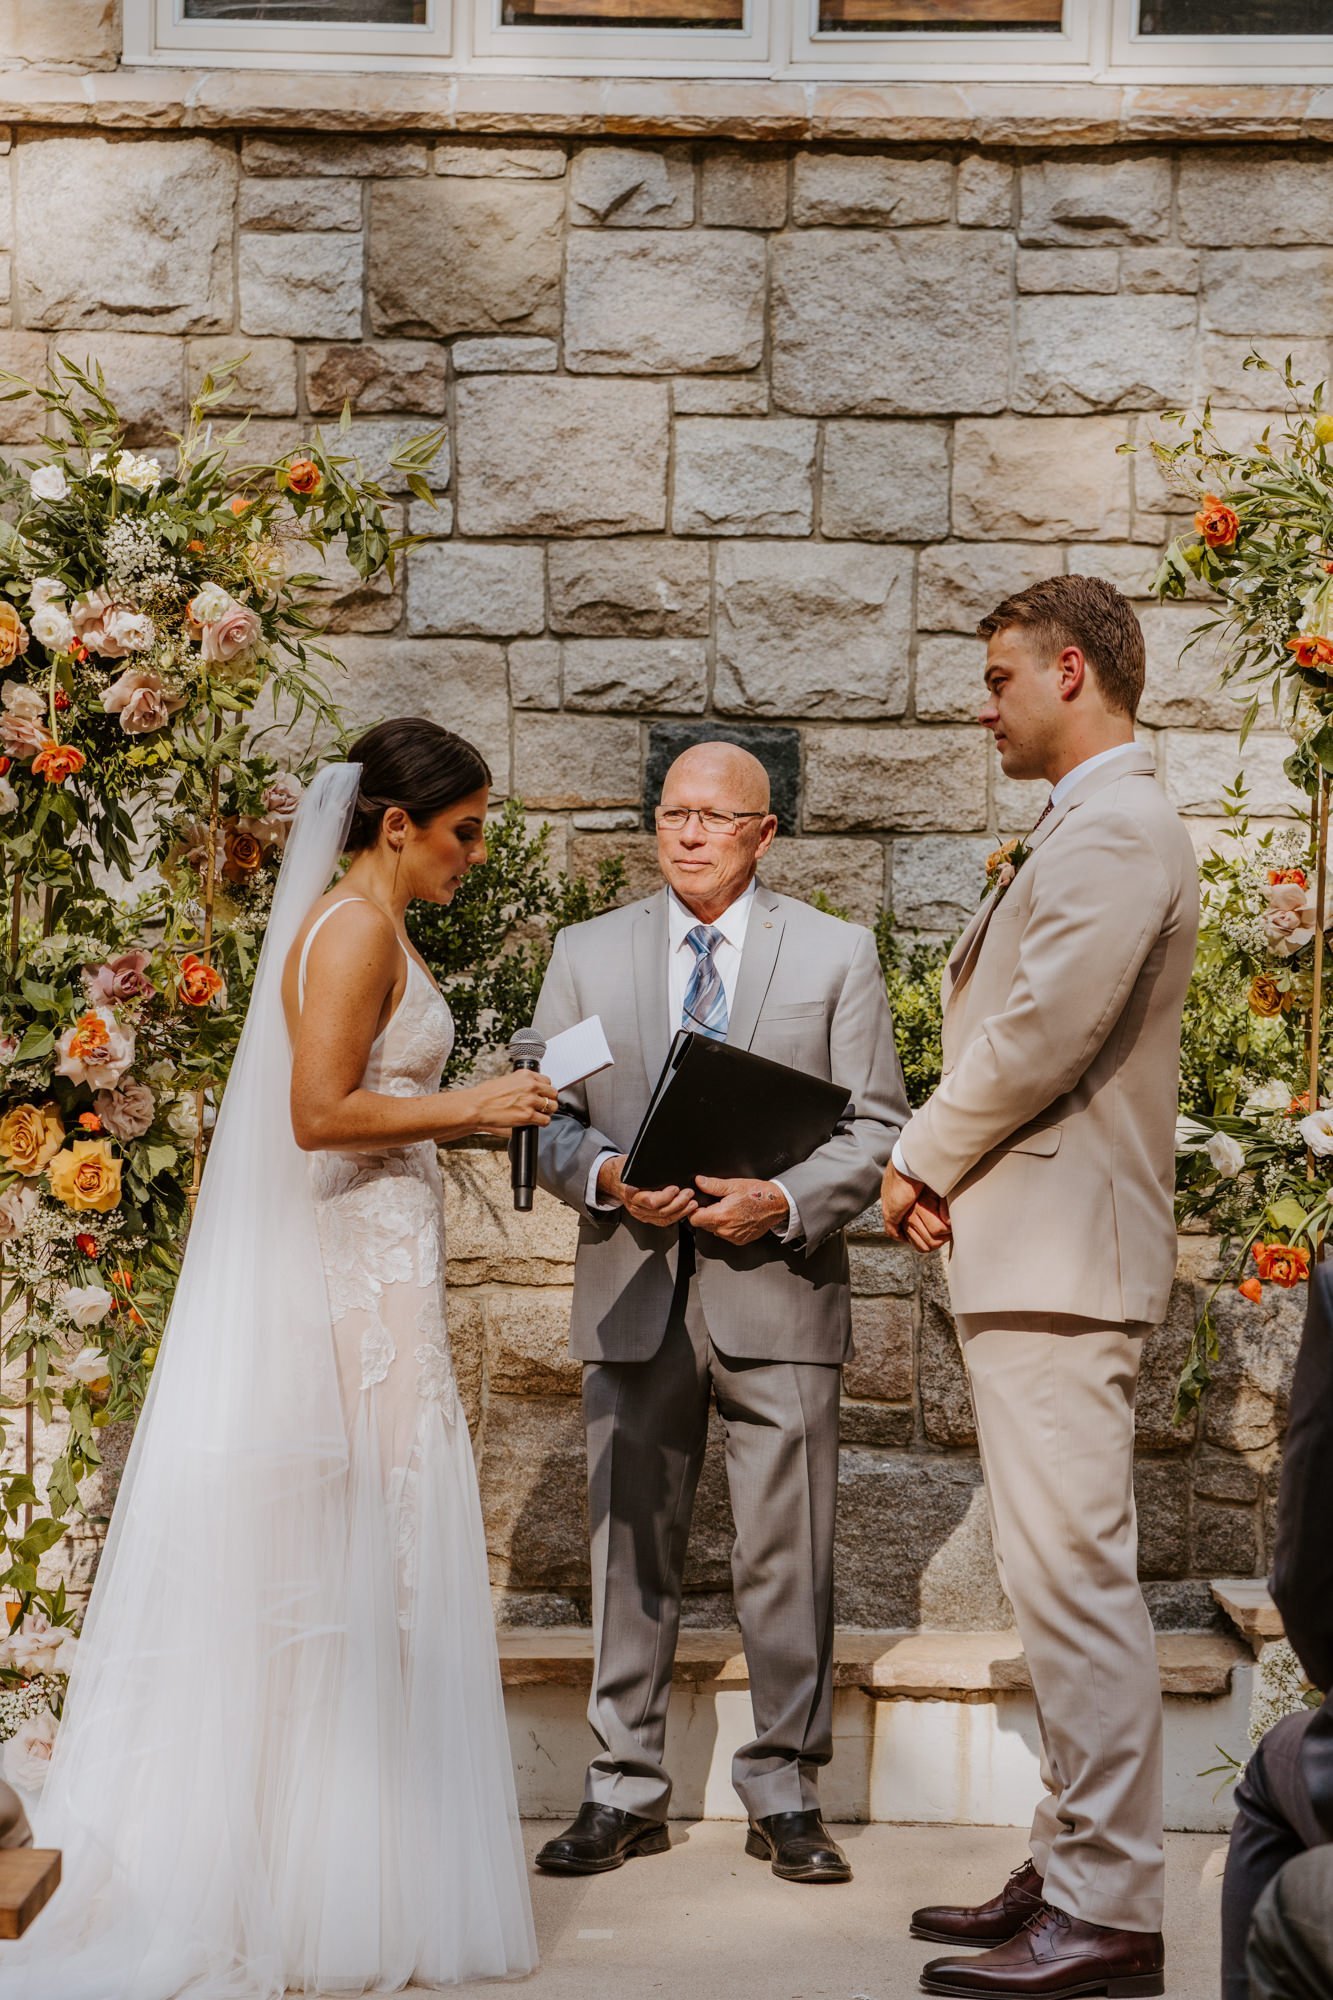 Emotional and candid bride and groom reading vows at wedding ceremony, Castle in the Forest Lake Arrowhead Wedding Ceremony,  Photo by Tida Svy